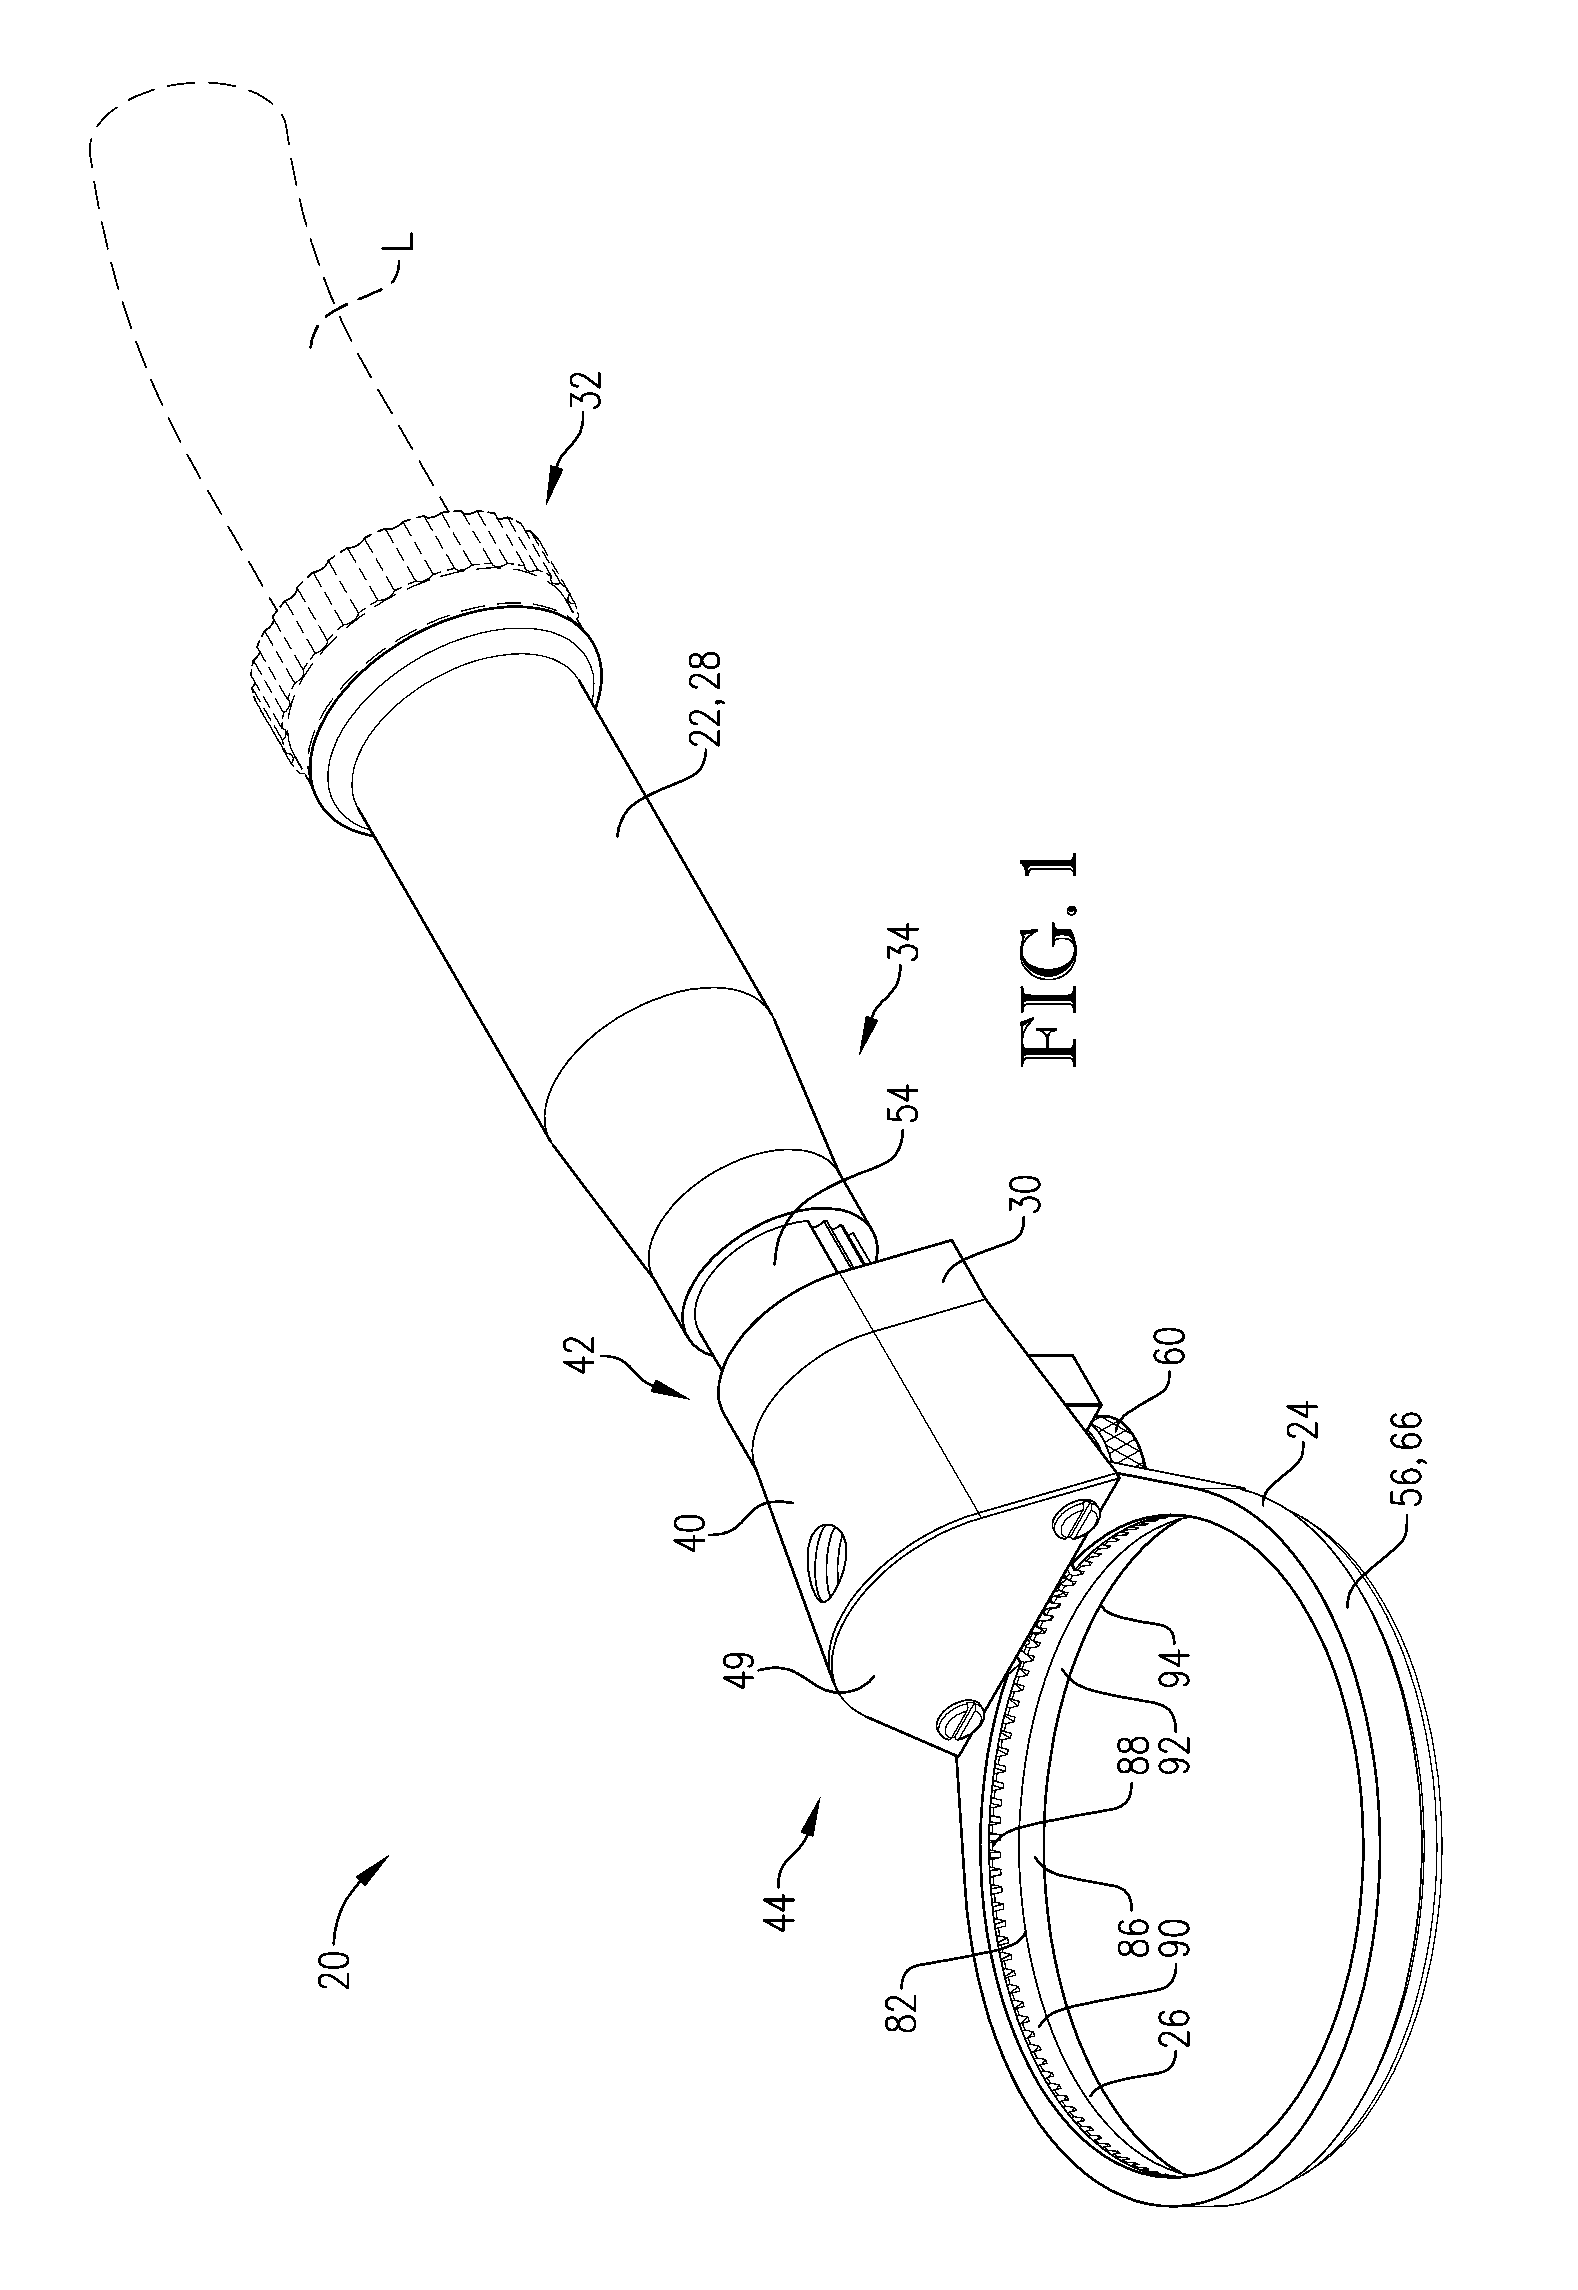 Rotary knife with mechanism for controlling blade housing